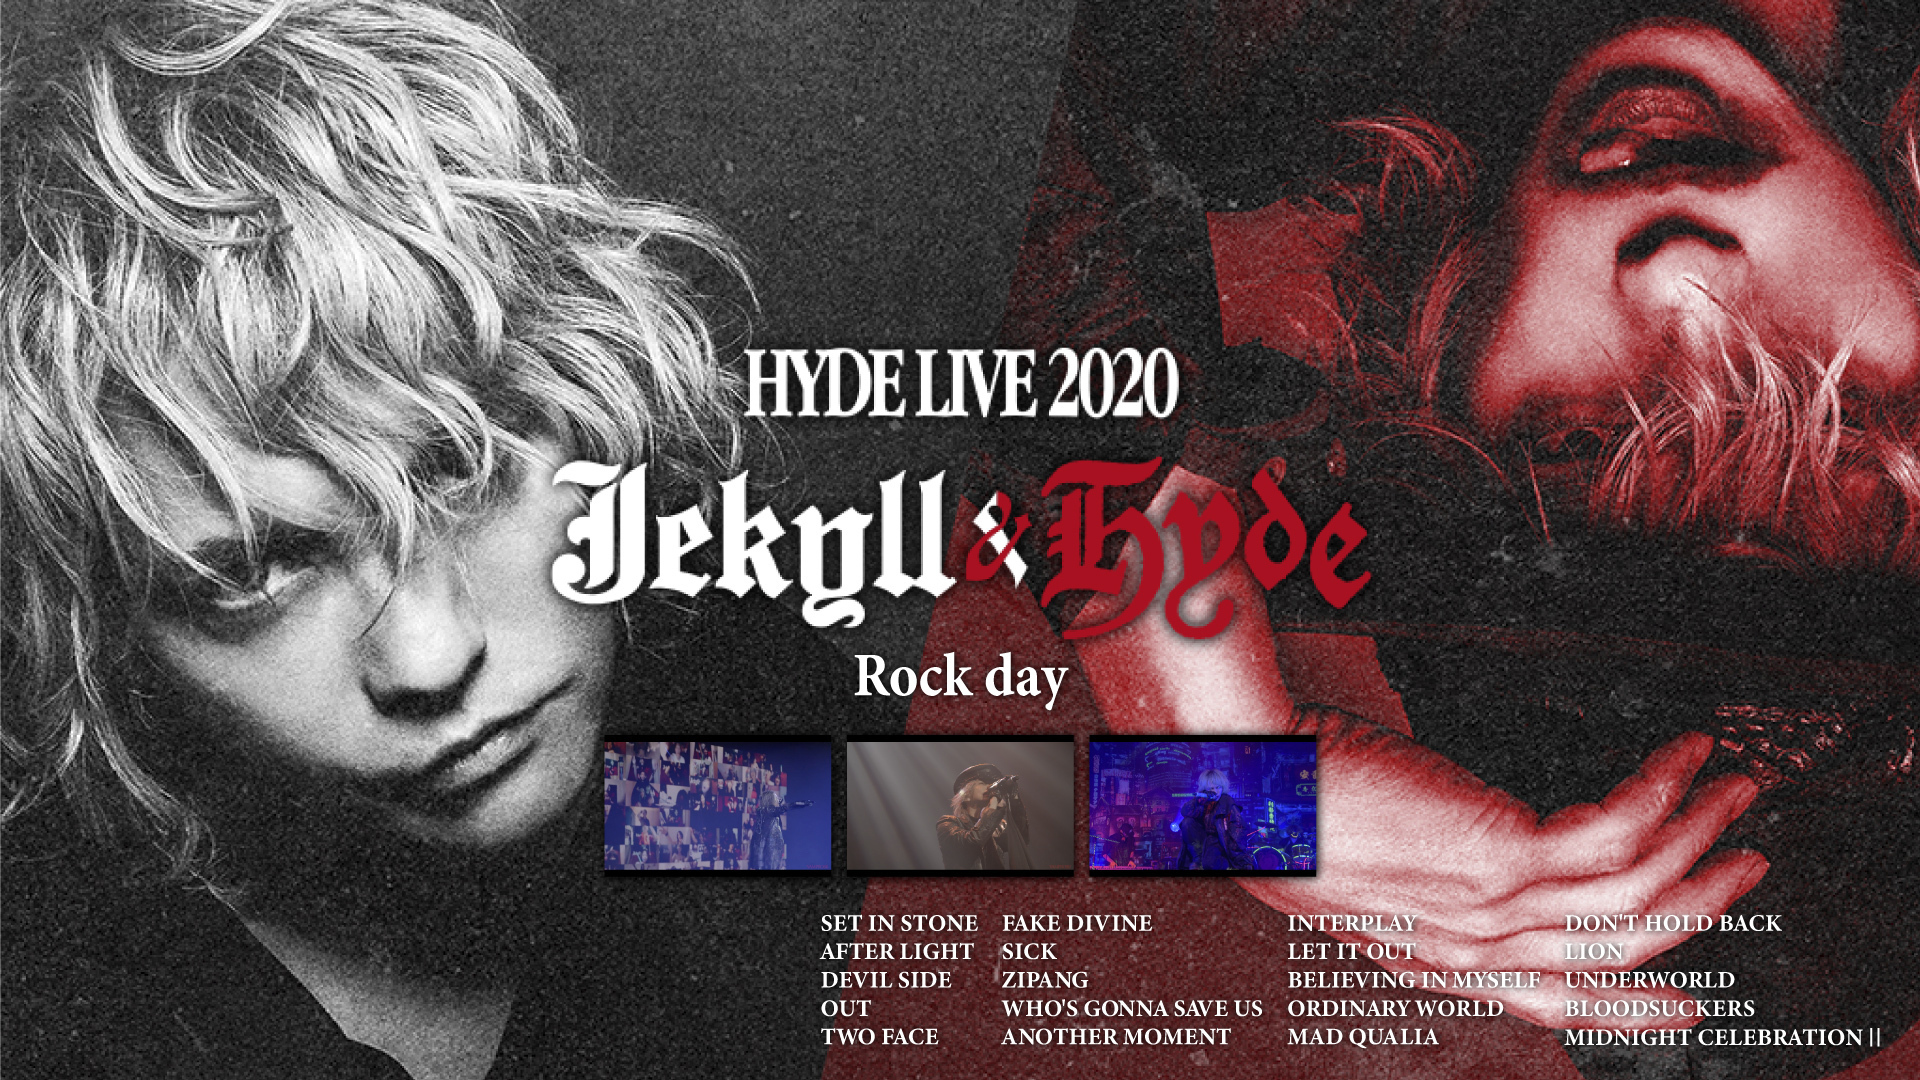 HYDE LIVE 2020 Jekyll & Hyde Rock Day